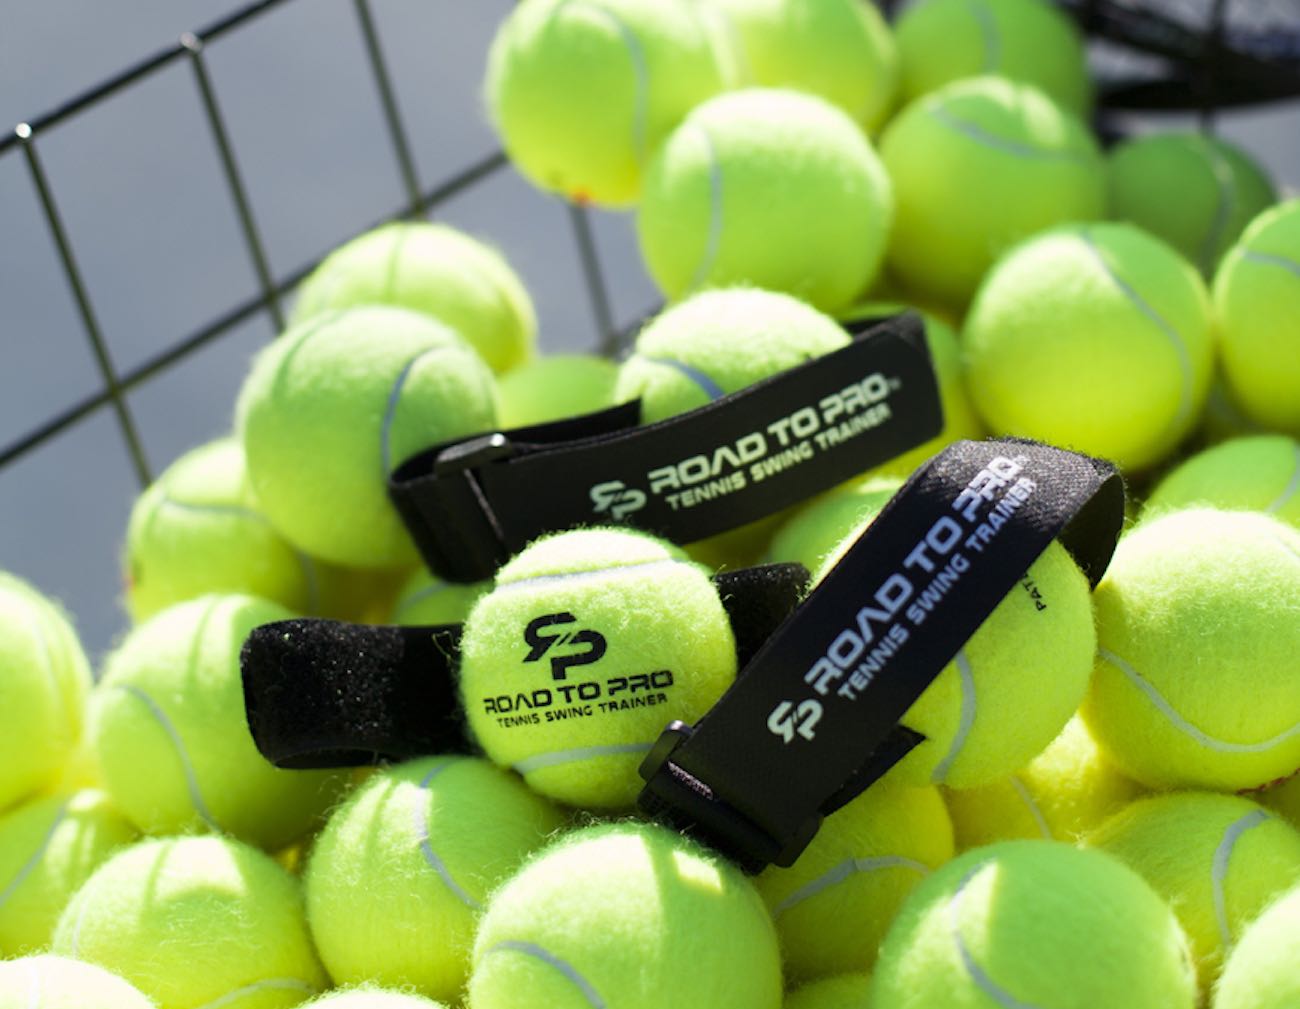 Road to Pro – Tennis Swing Training System